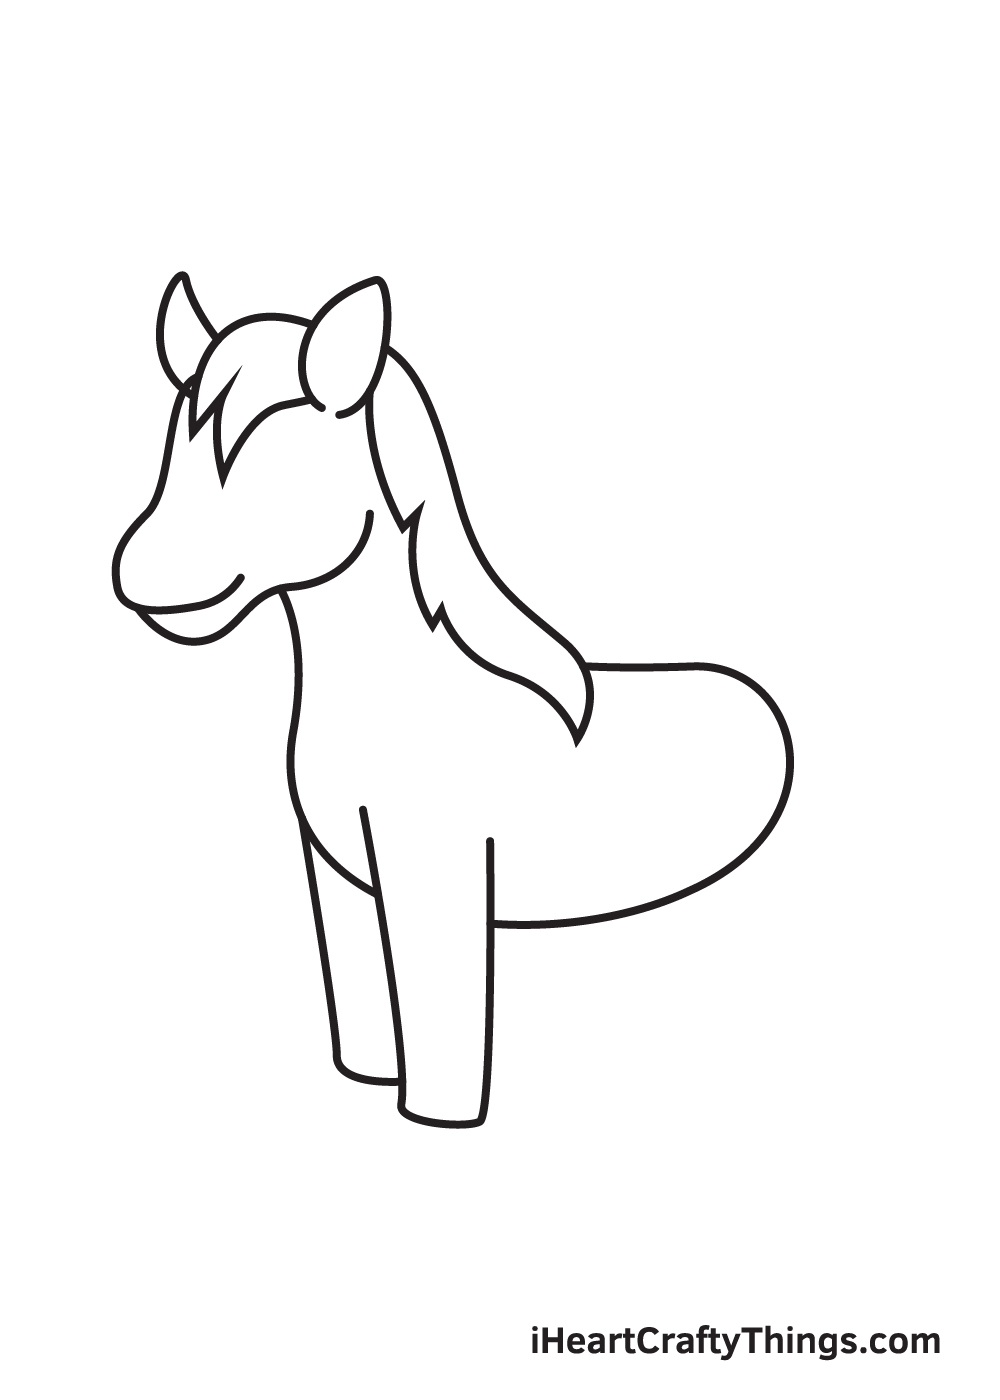 horse drawing - step 5